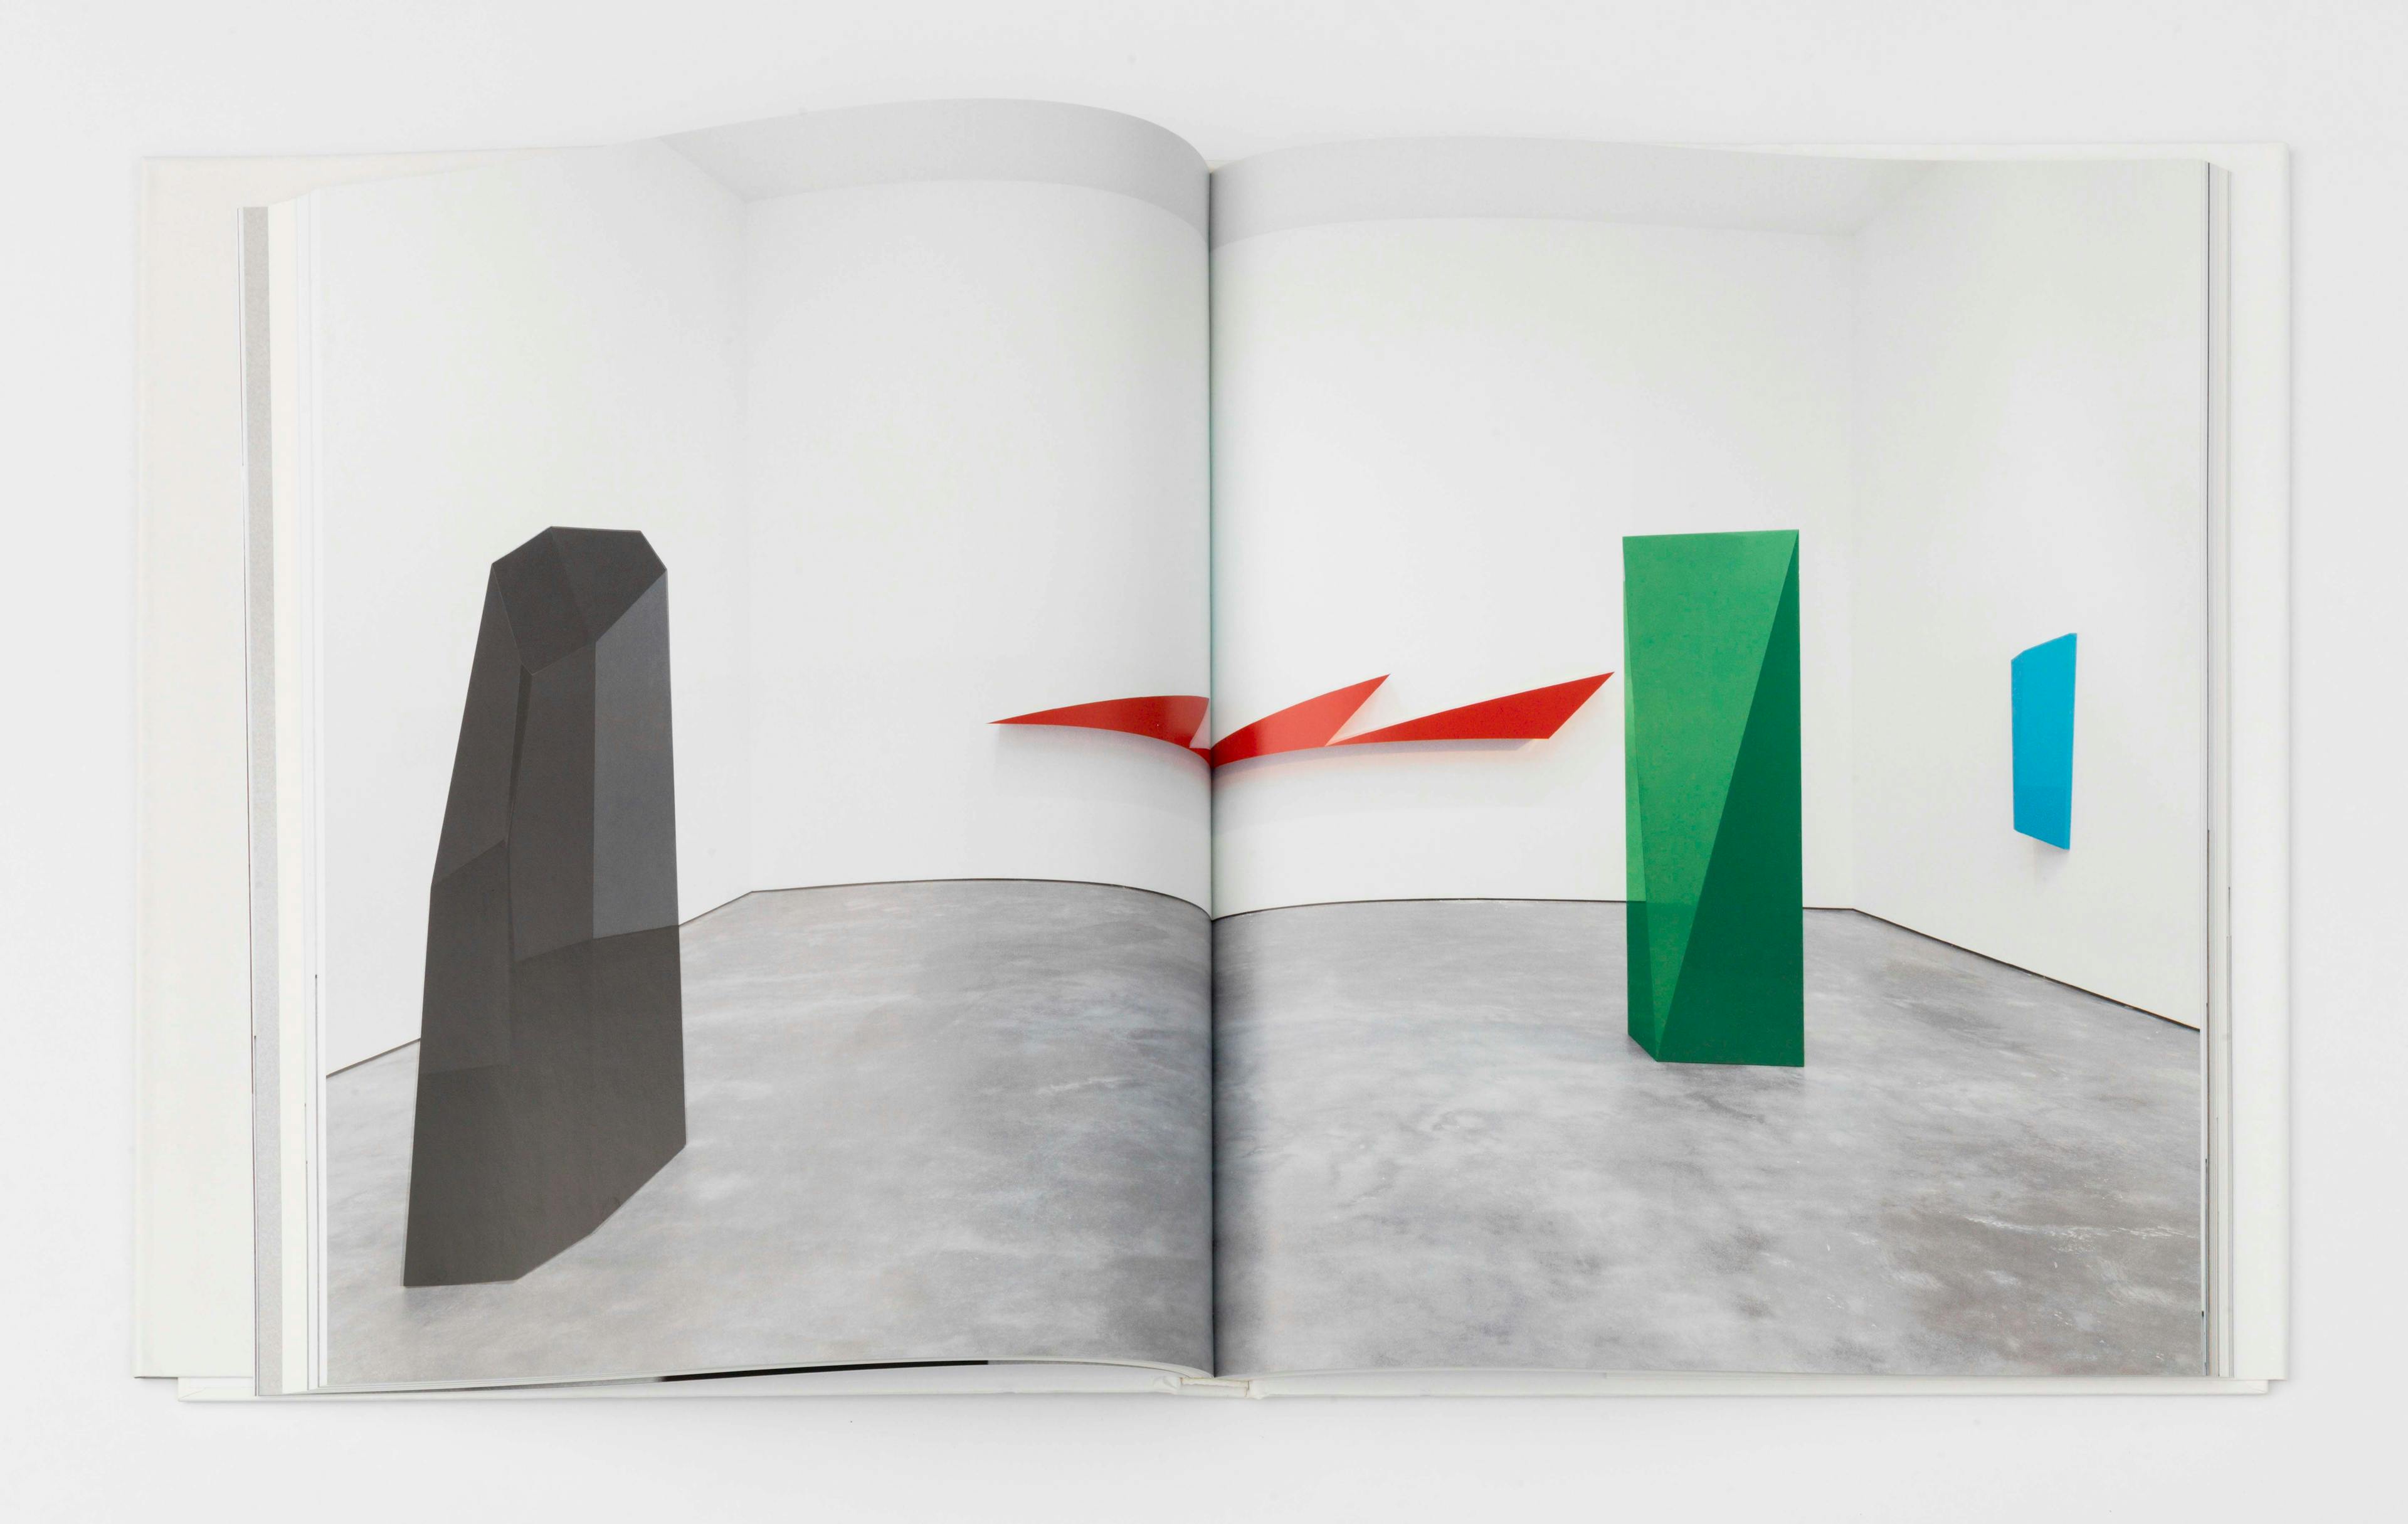 A spread from John McCracken: Works from 1963-2011, published by David Zwirner Books / Radius Books, 2014.